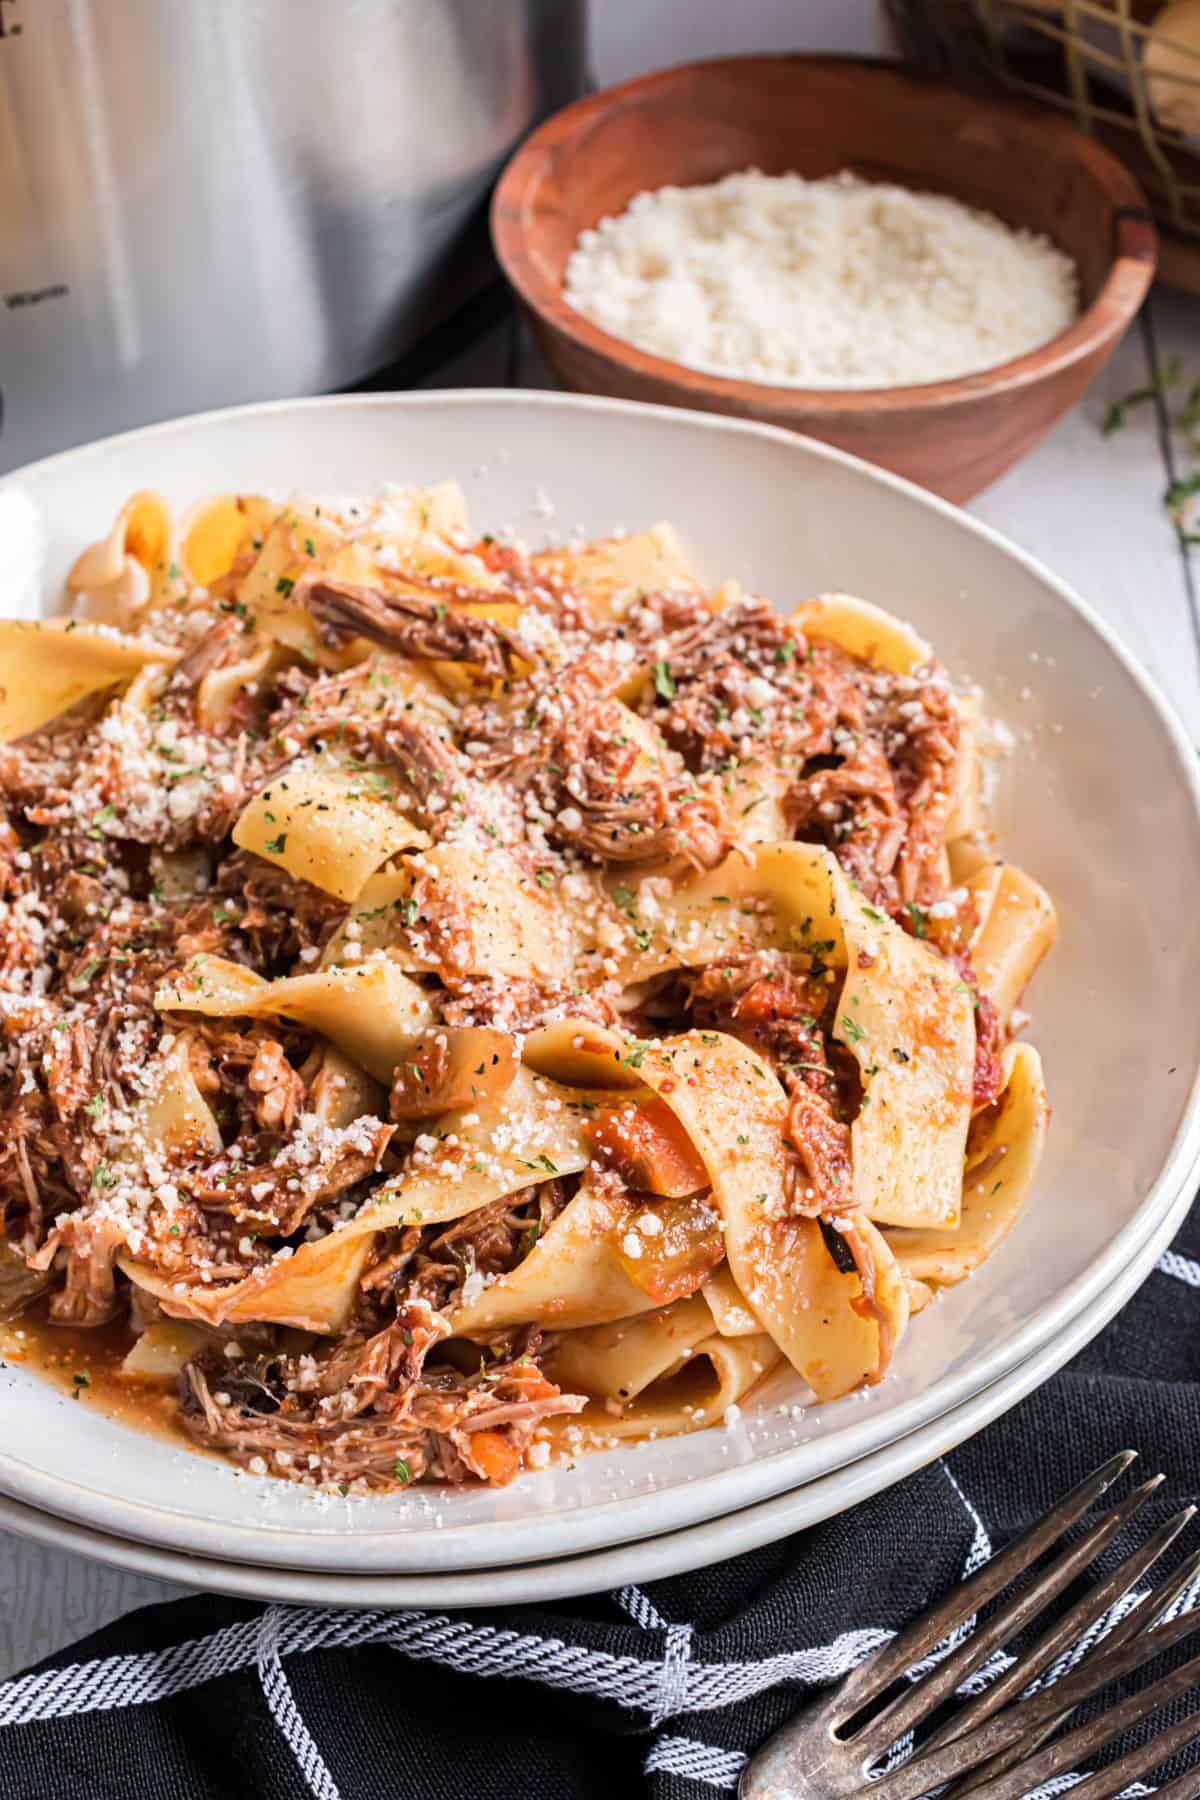 Pork ragu on pappardelle pasta with grated parmesan cheese.